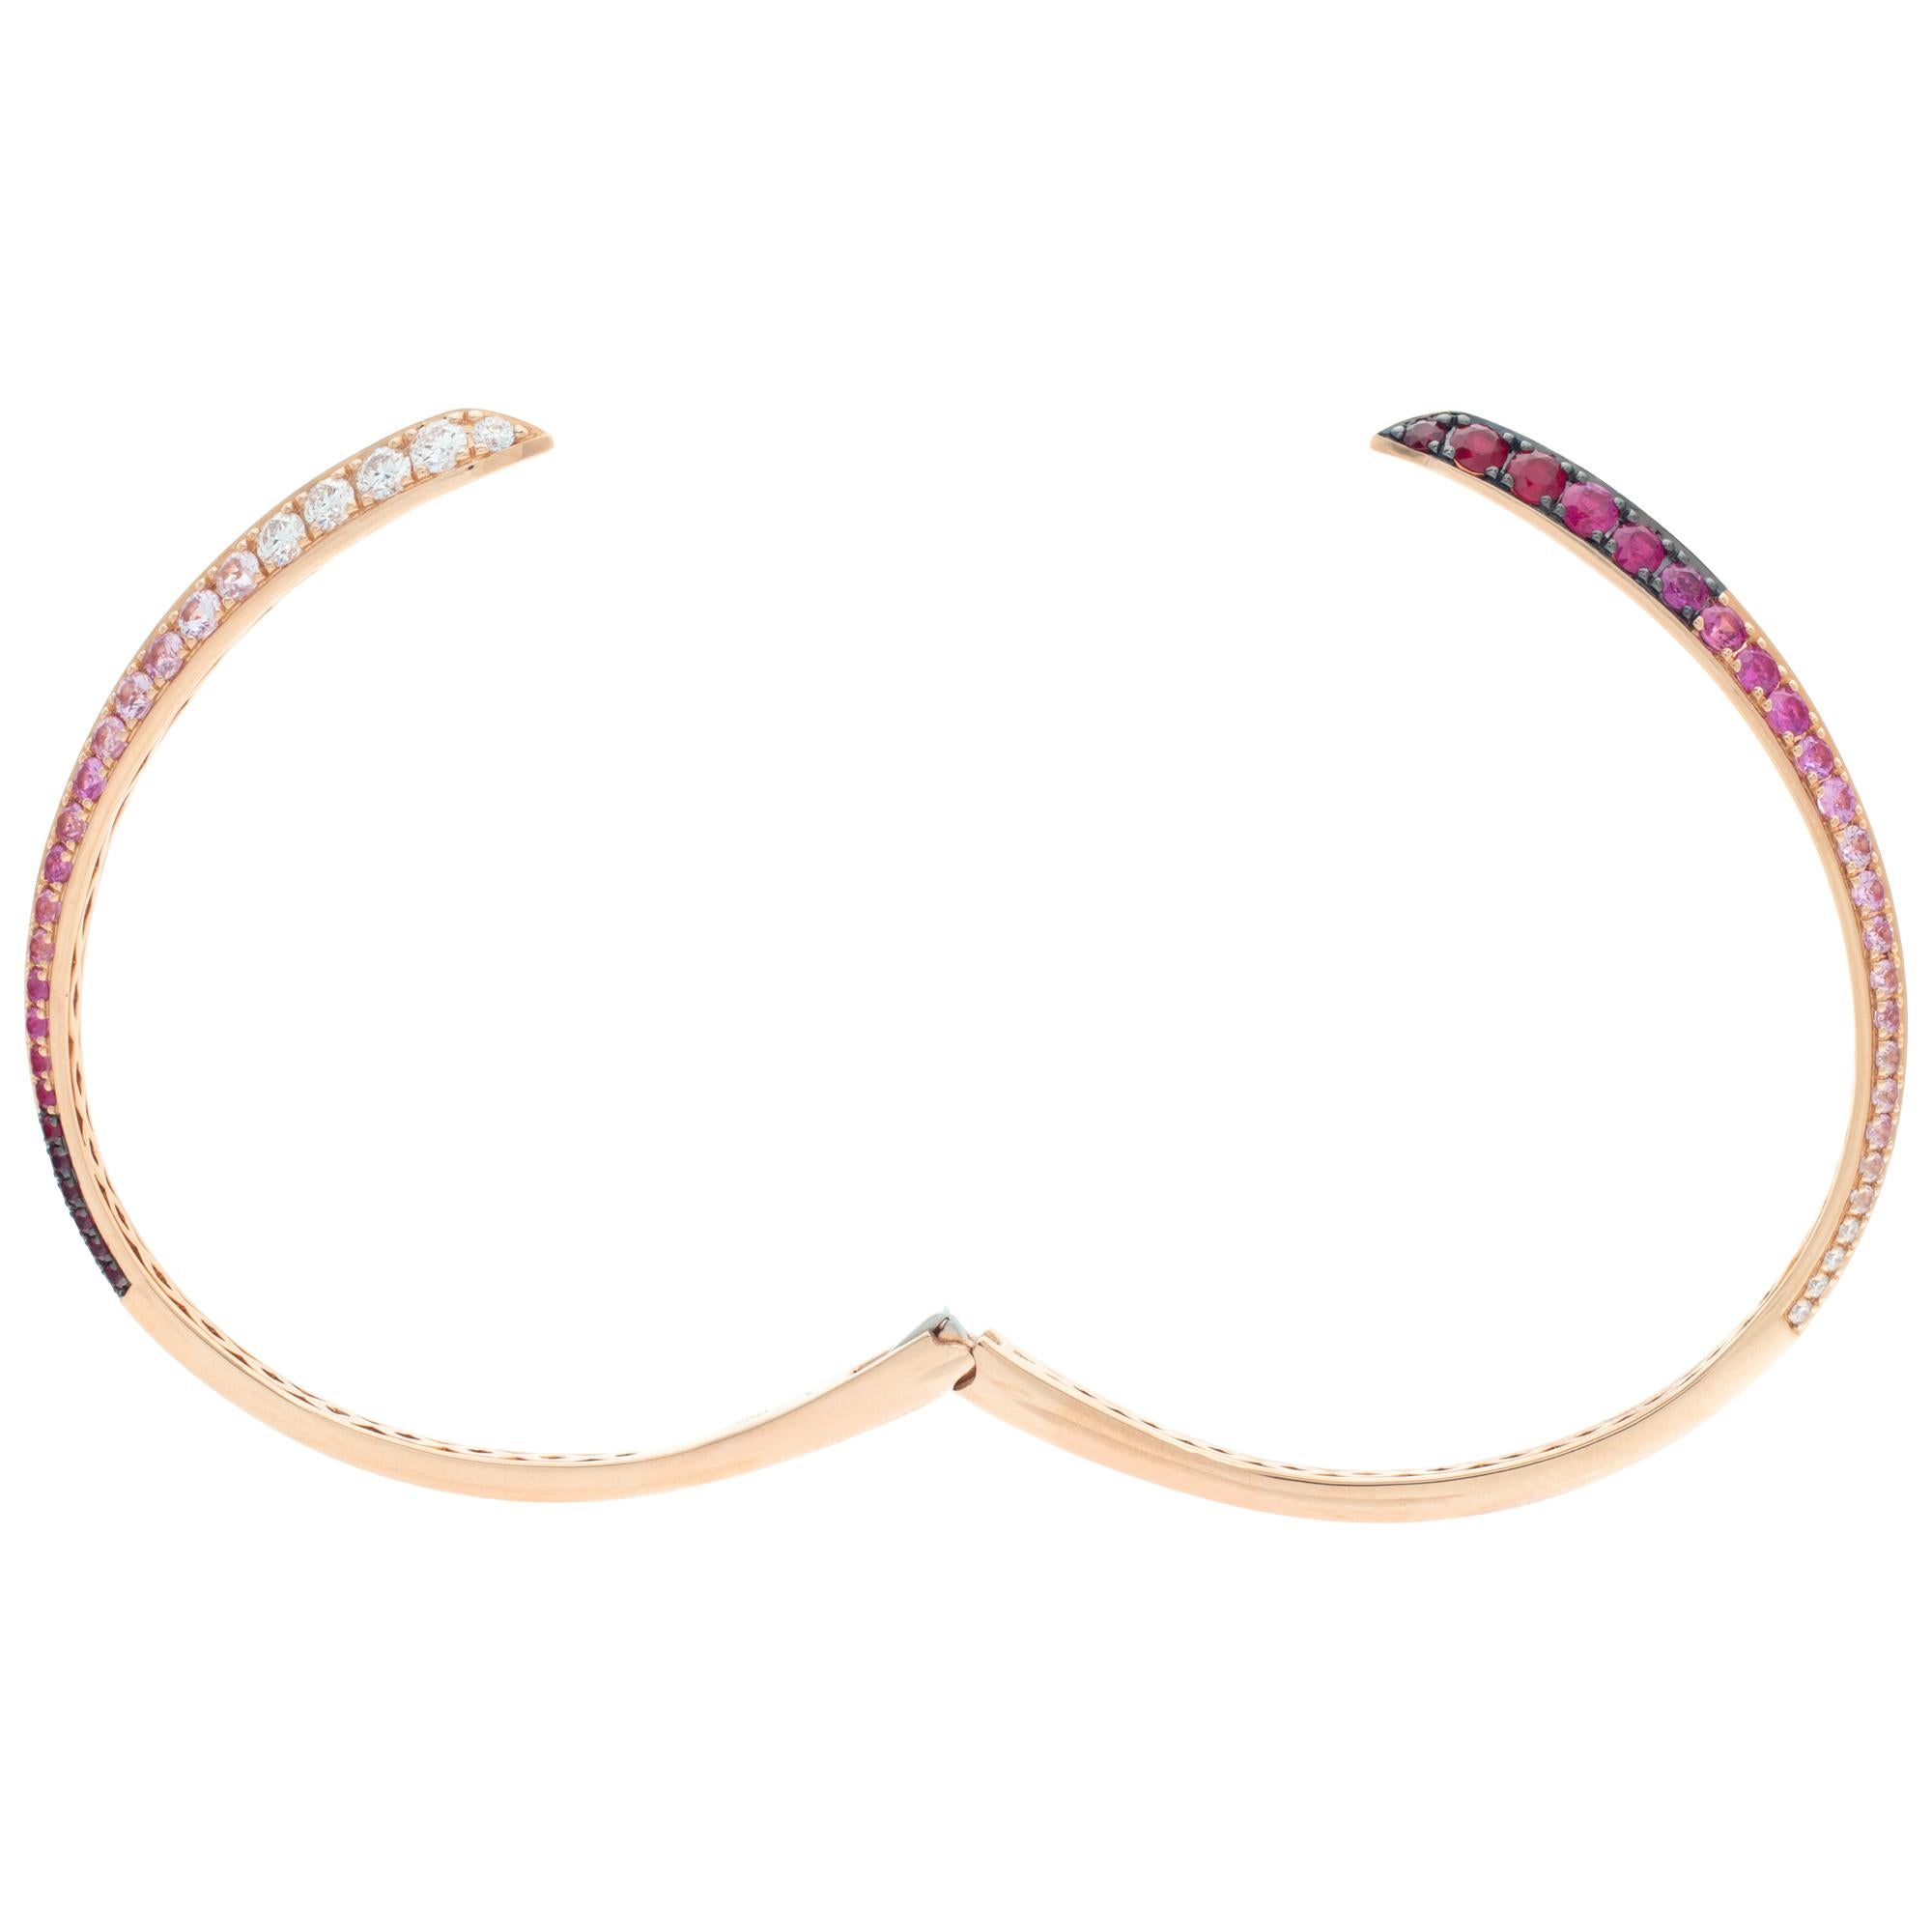 Beautiful 18k rose gold bangle with 0.8 carat in G-H Color, VS Clarity round cut diamonds and 3.74 carats in round cut light and dark pink sapphires. For wrist up to 7''